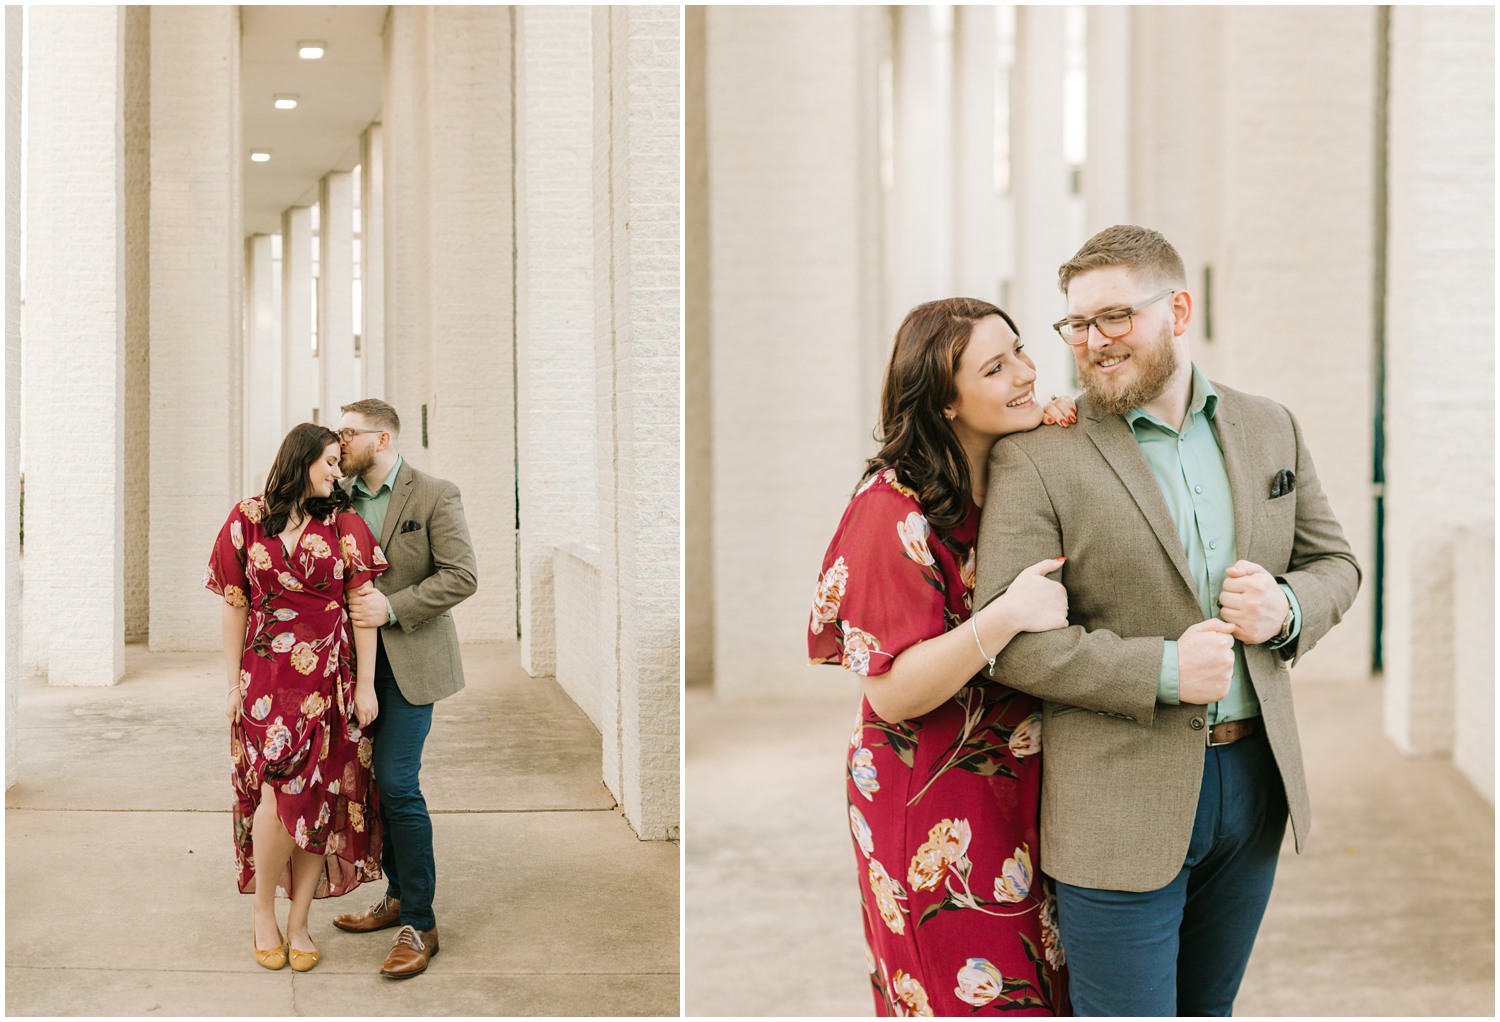 Marshall Park engagement portraits in Charlotte NC